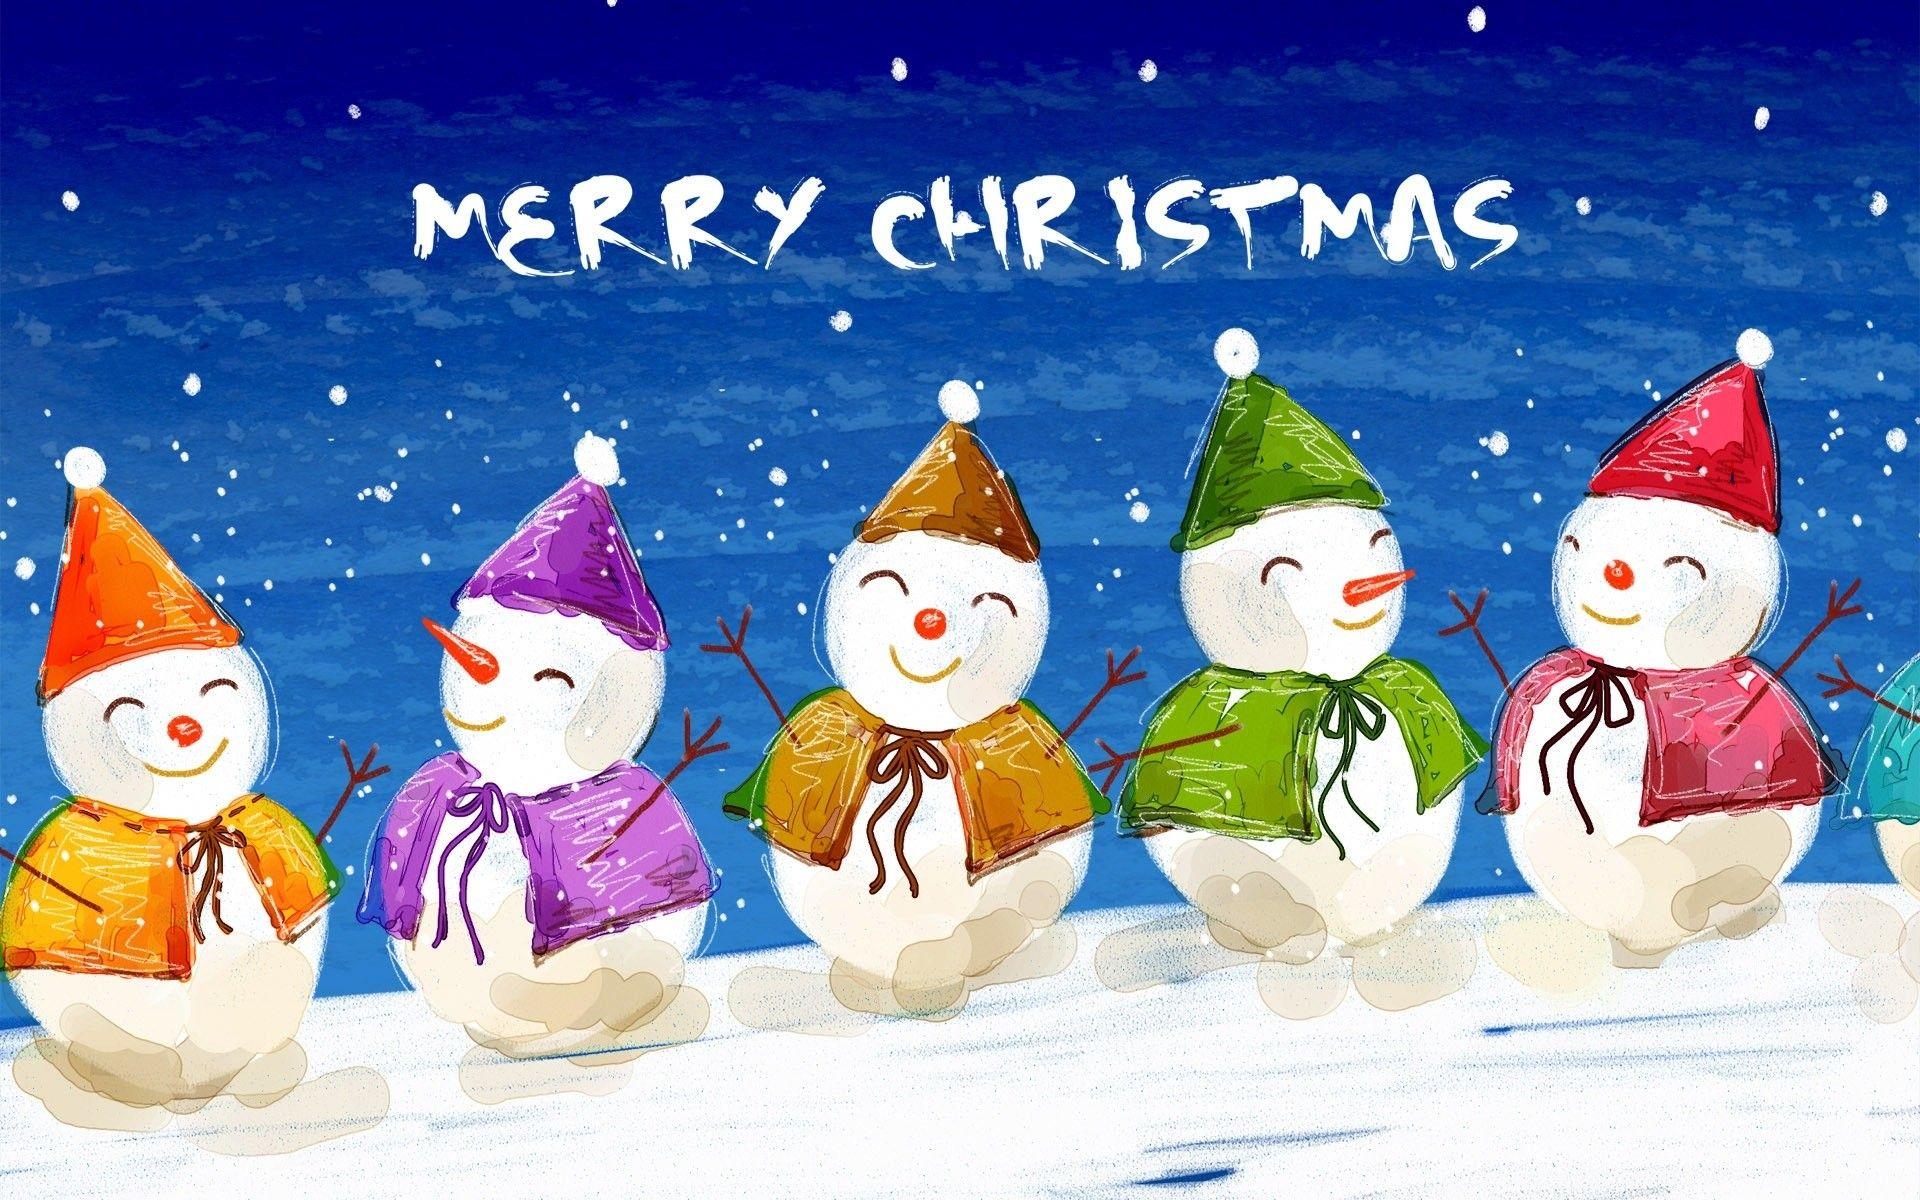 Merry Christmas Animated Wallpapers - Wallpaper Cave